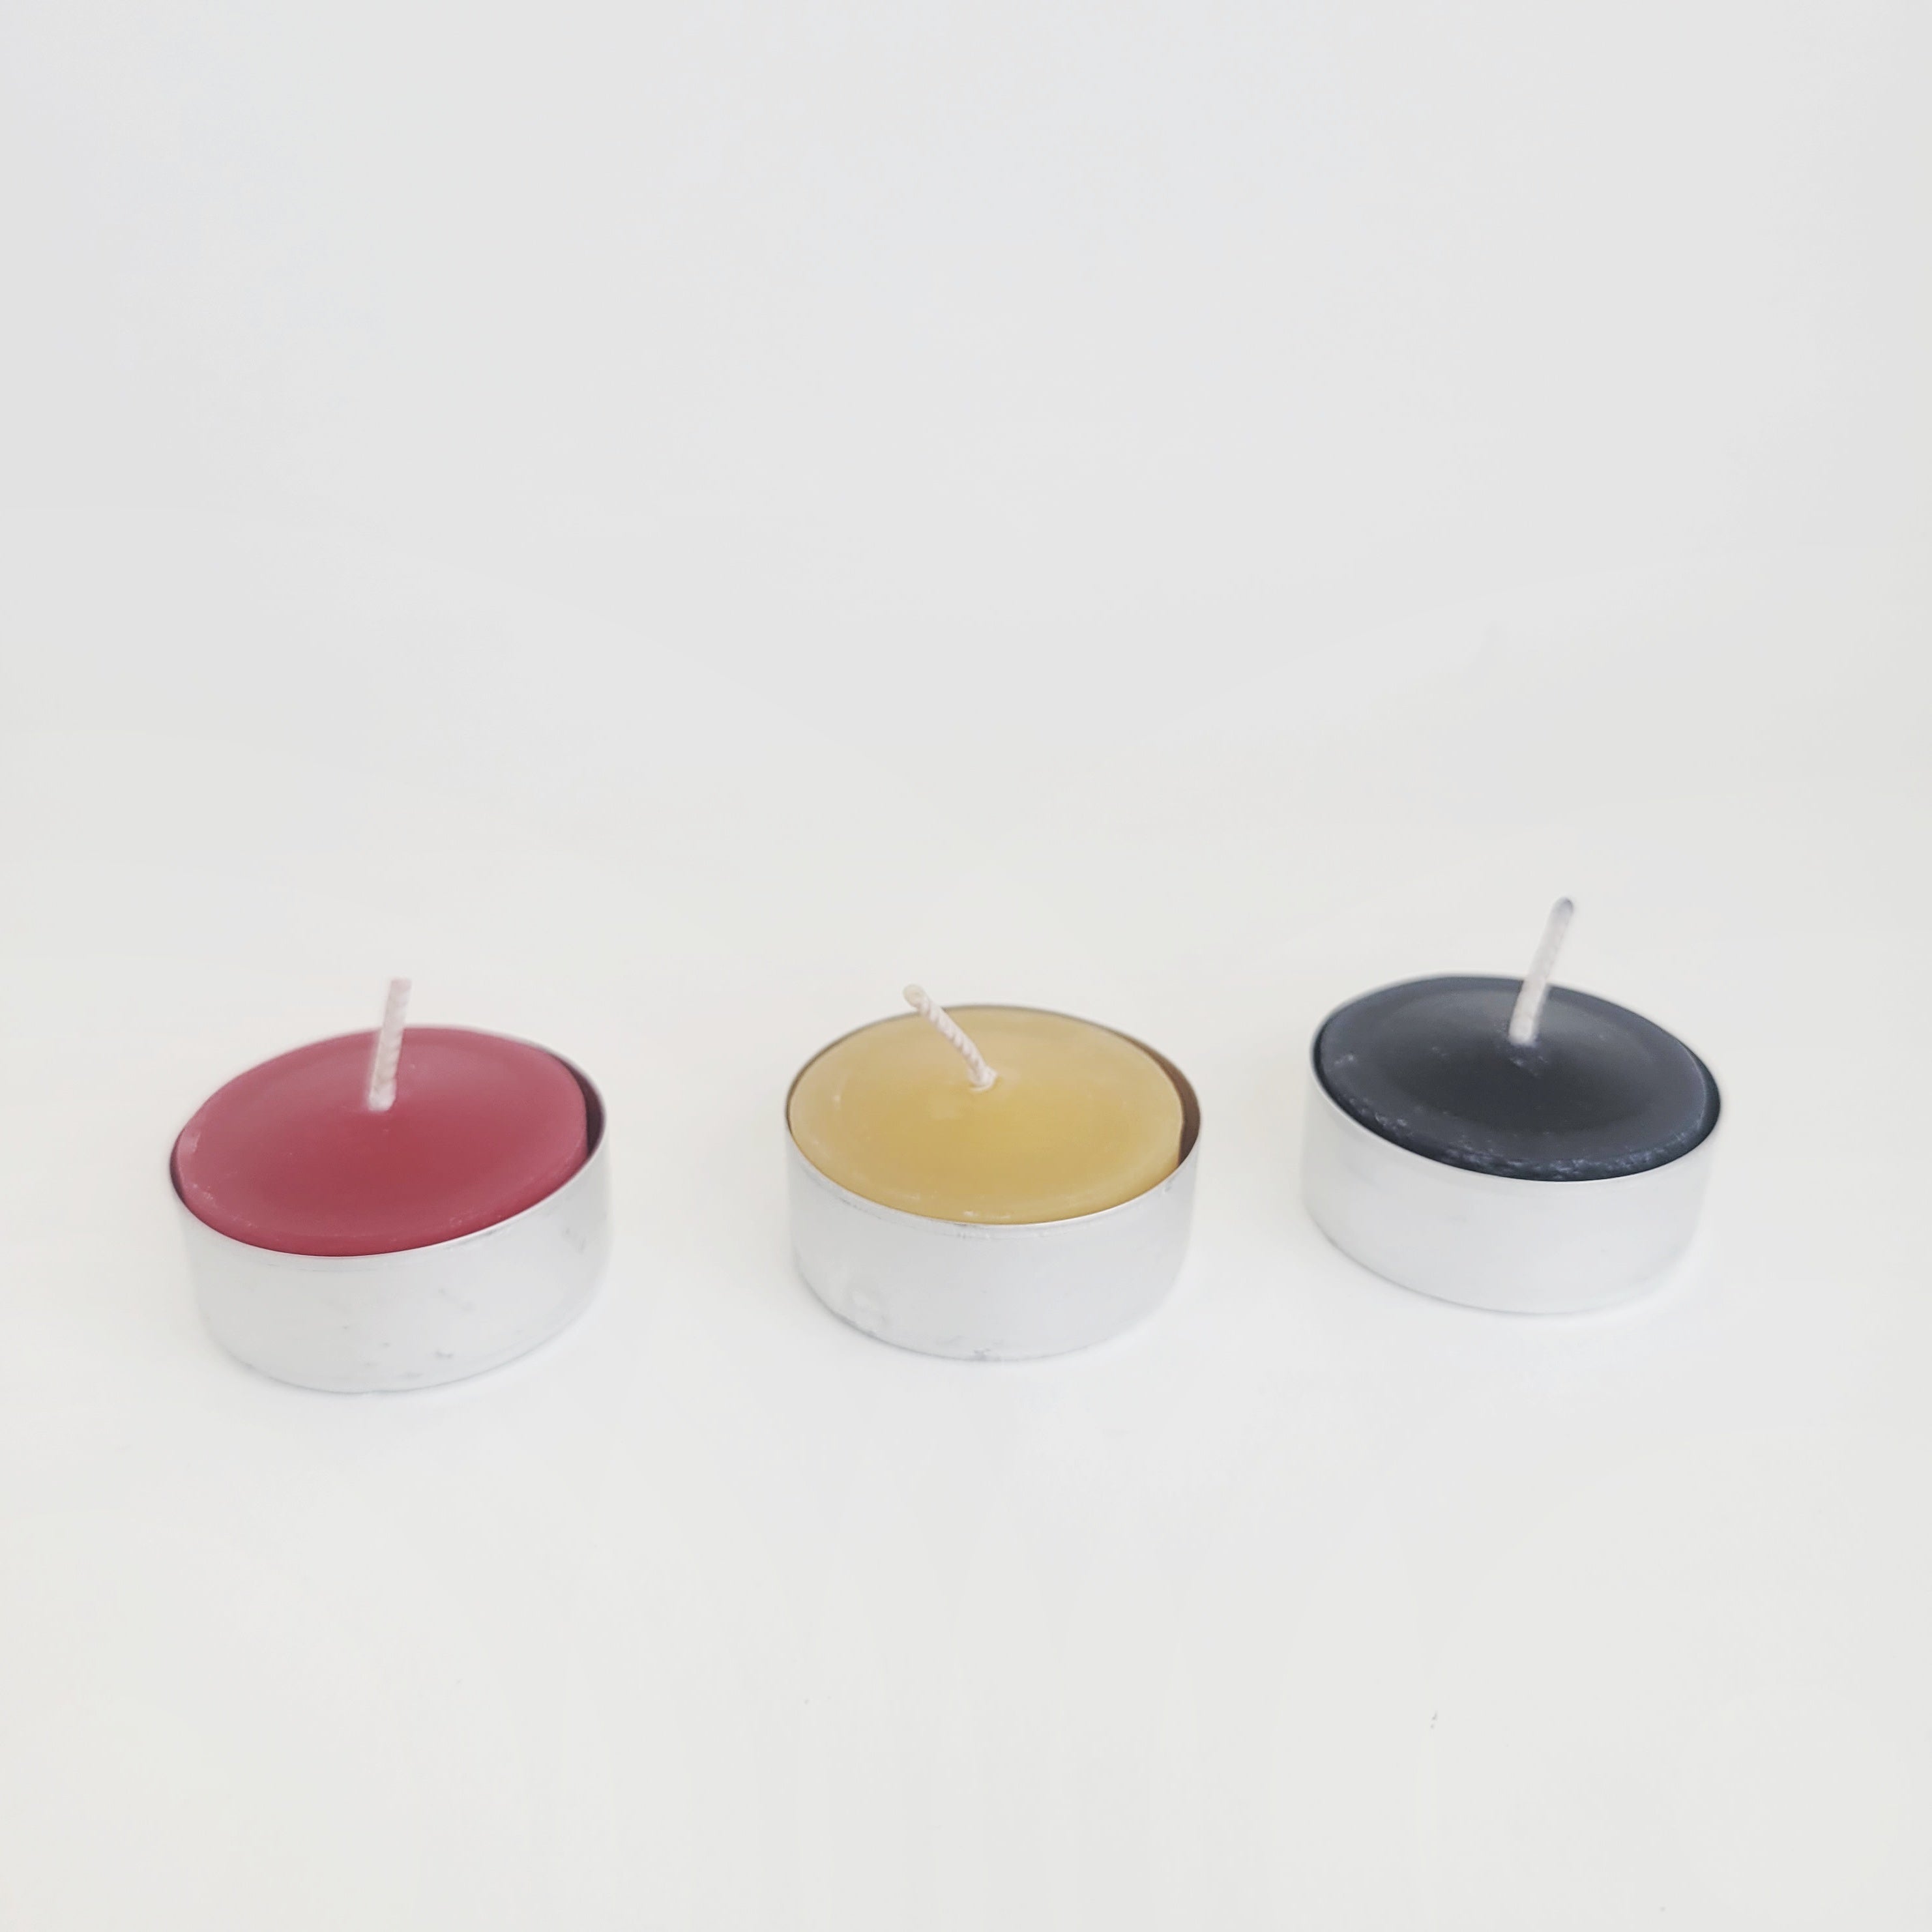 Colorful beeswax tealights - red, natural honey, and black - arranged side by side against a white background, perfect for home decor and ambiance.